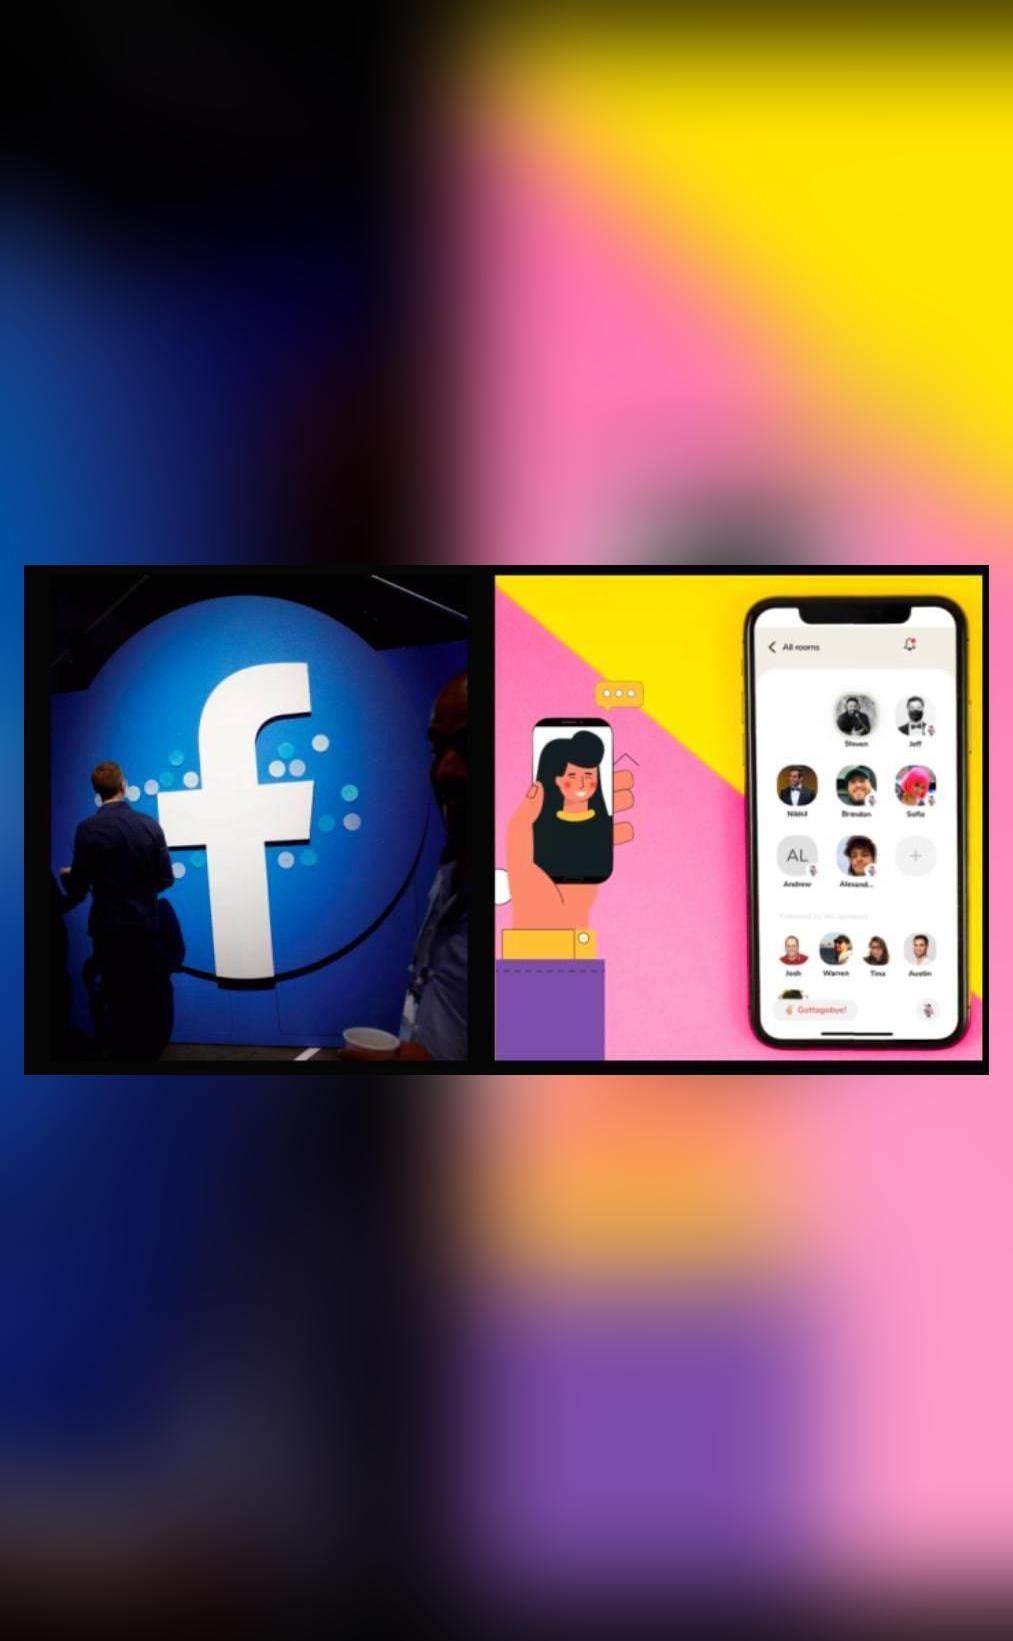 Facebook working on social media app similar to Clubhouse ...